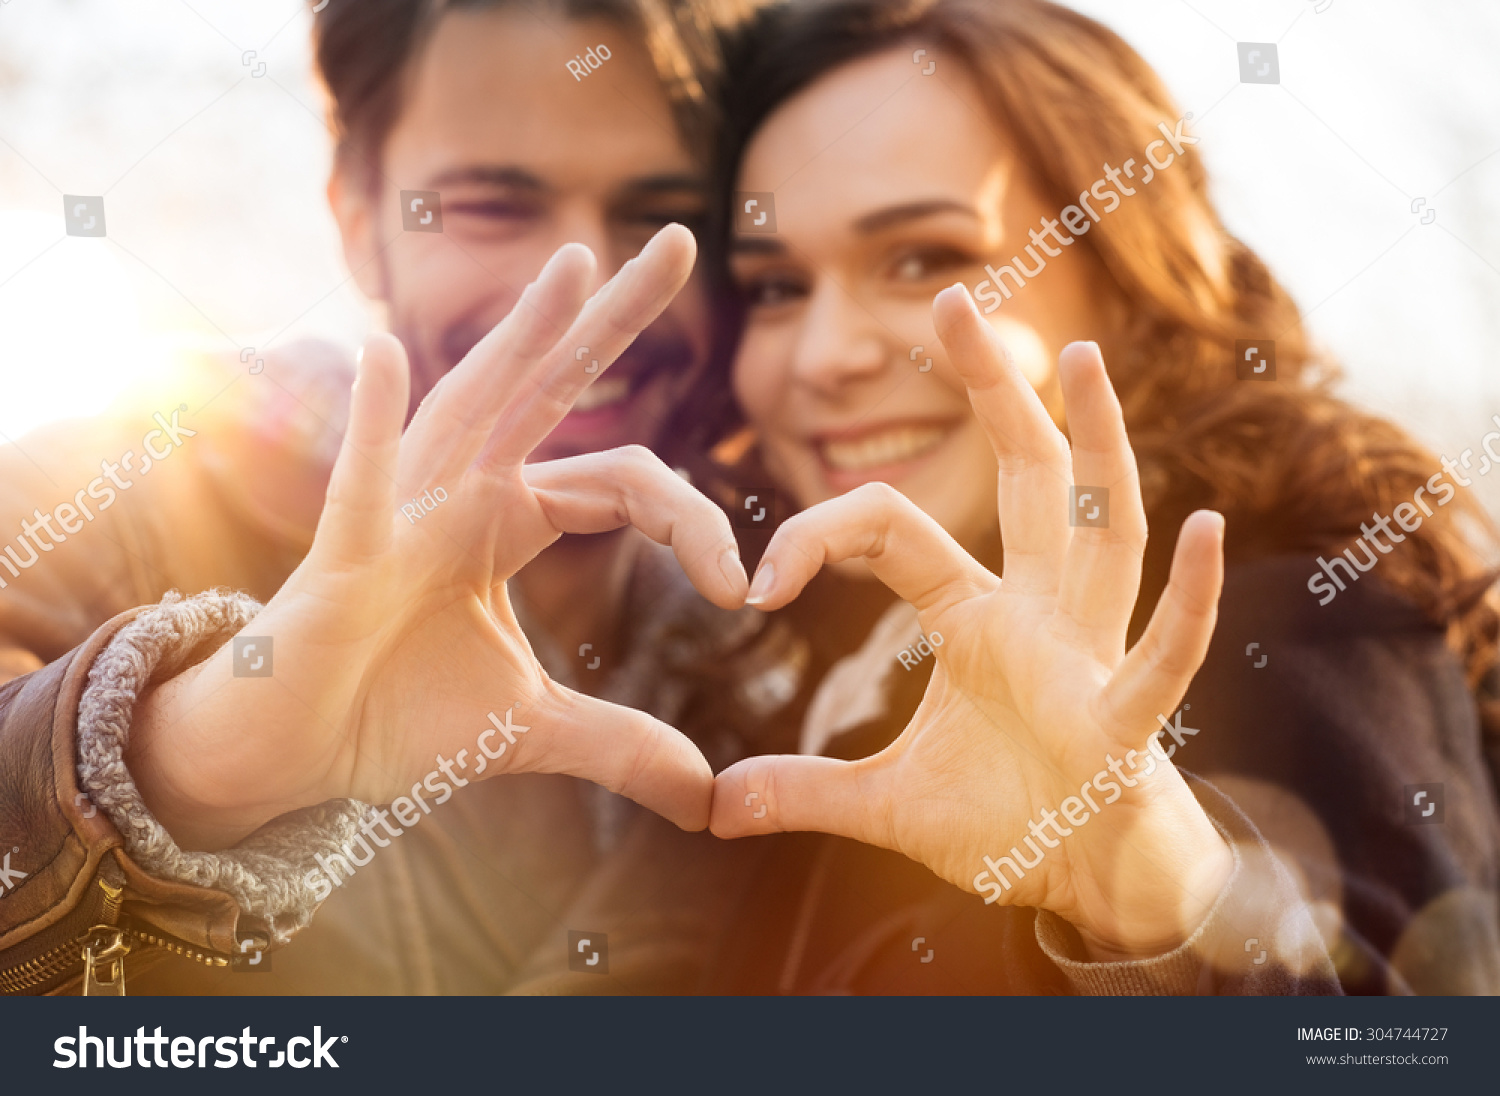 Closeup of couple making heart shape with hands #304744727